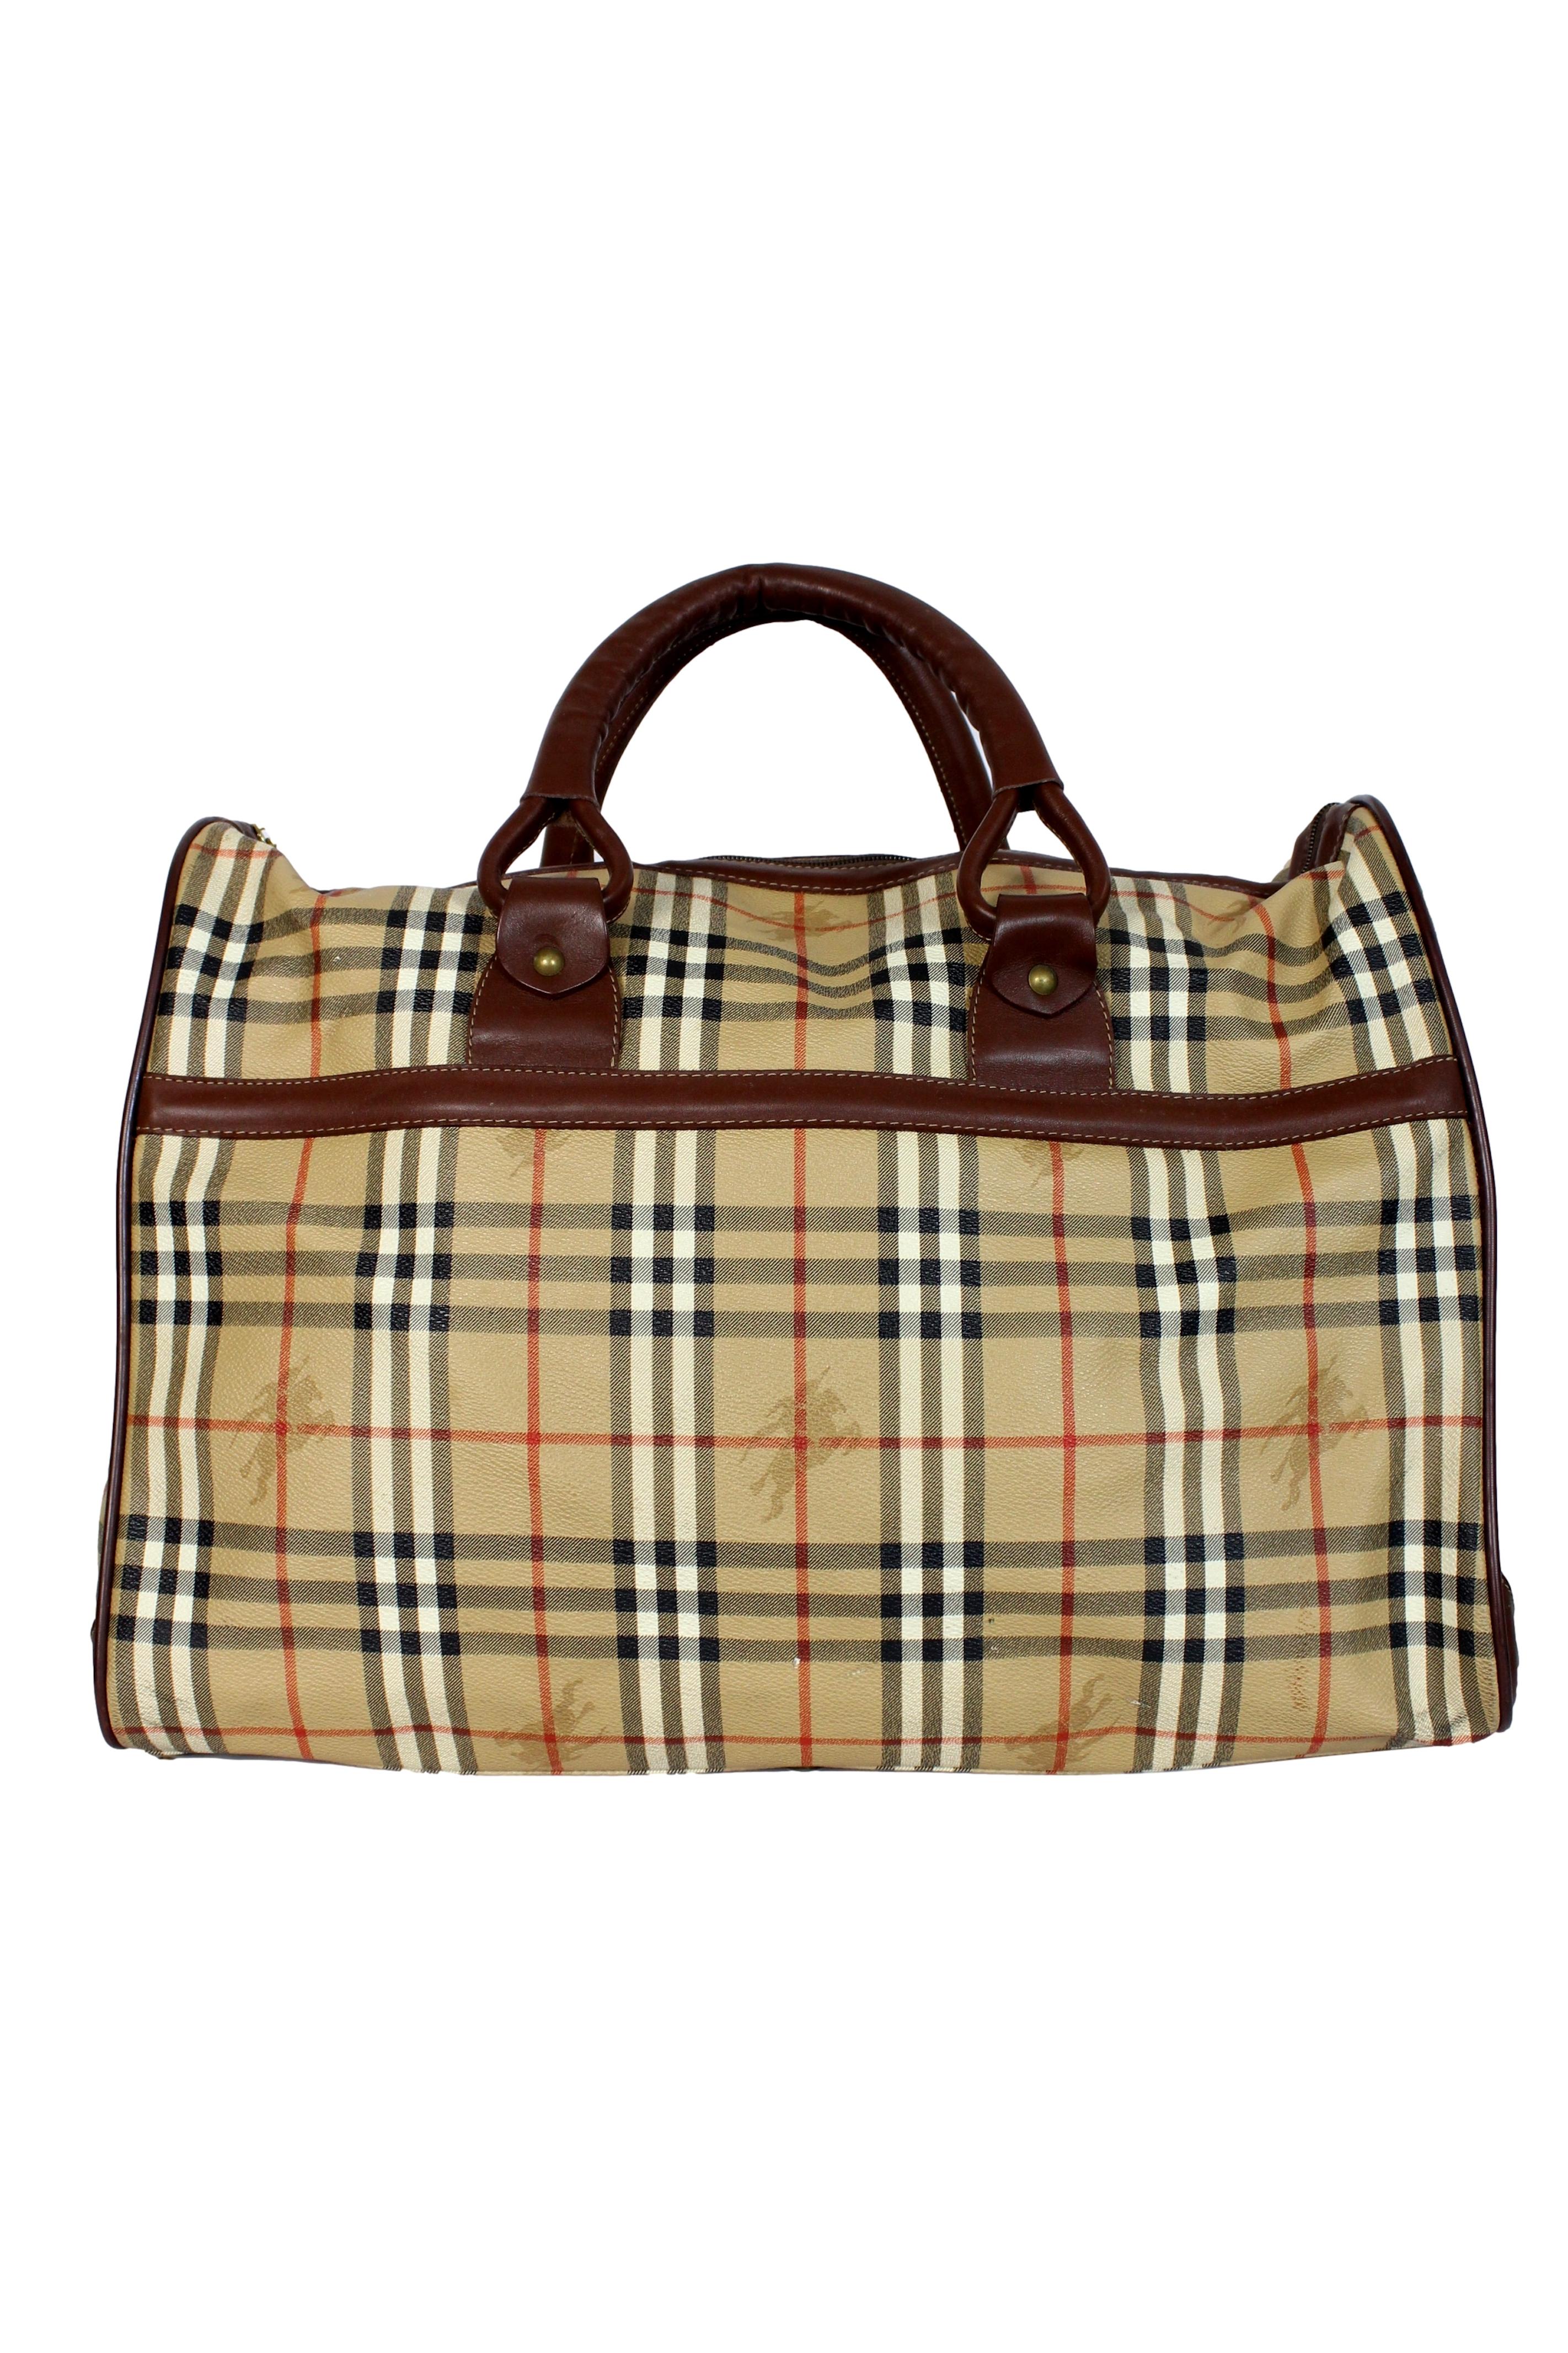 Burberry vintage beige tartan travel Bag 1980s. Semi-rigid luggage bag, beige and brown with gold-colored details. Fabric in canvas and leather. Large compartment on the front, zip closure. Made in Italy.

Condition: Excellent

Item used few times,